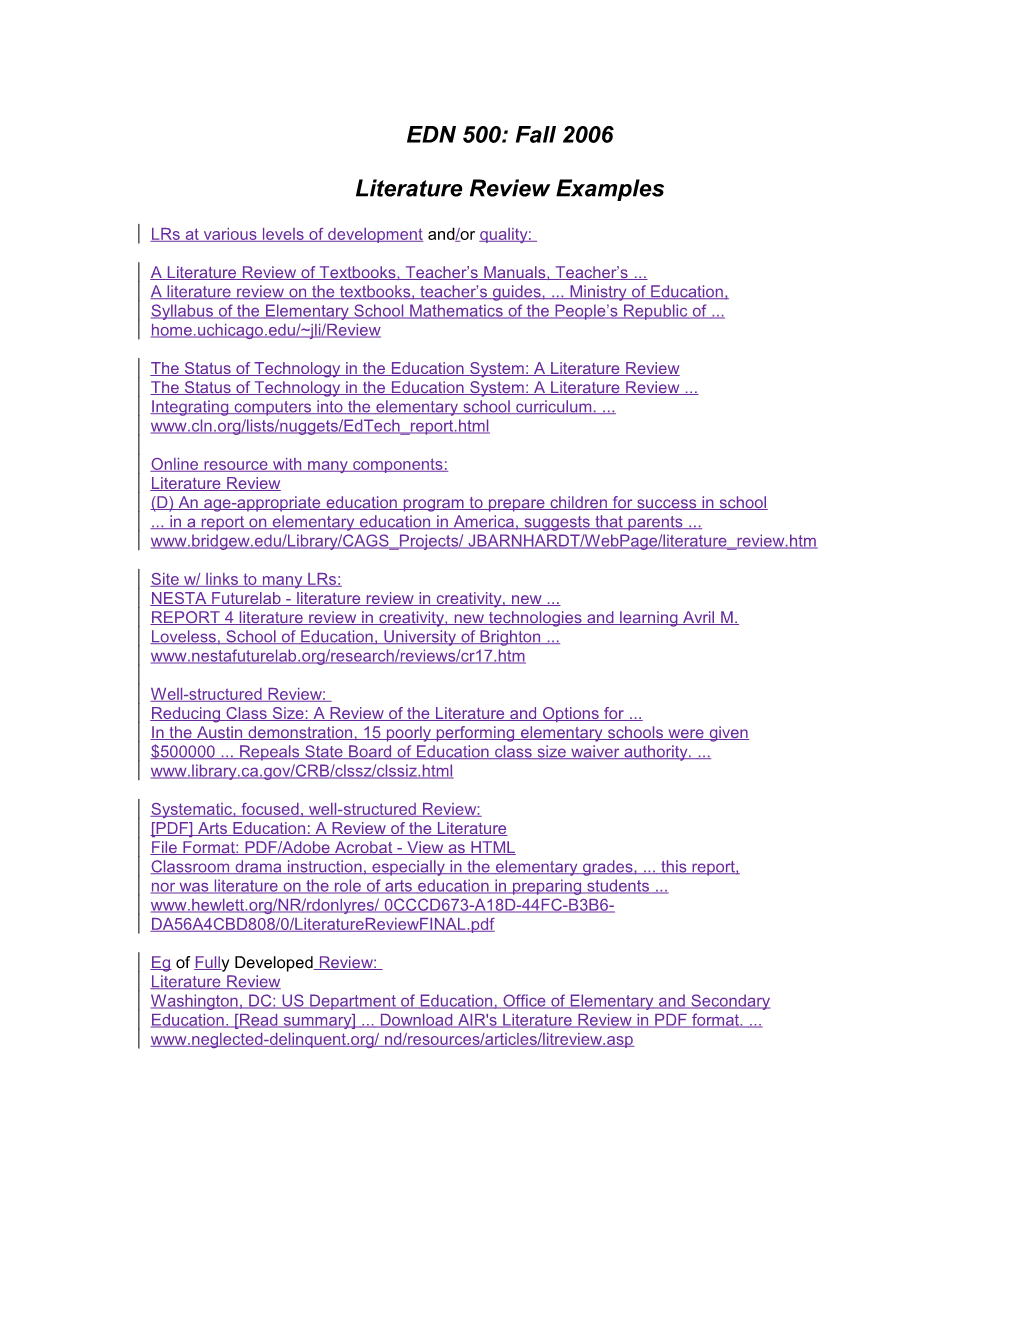 EDN 500: Literature Review Examples